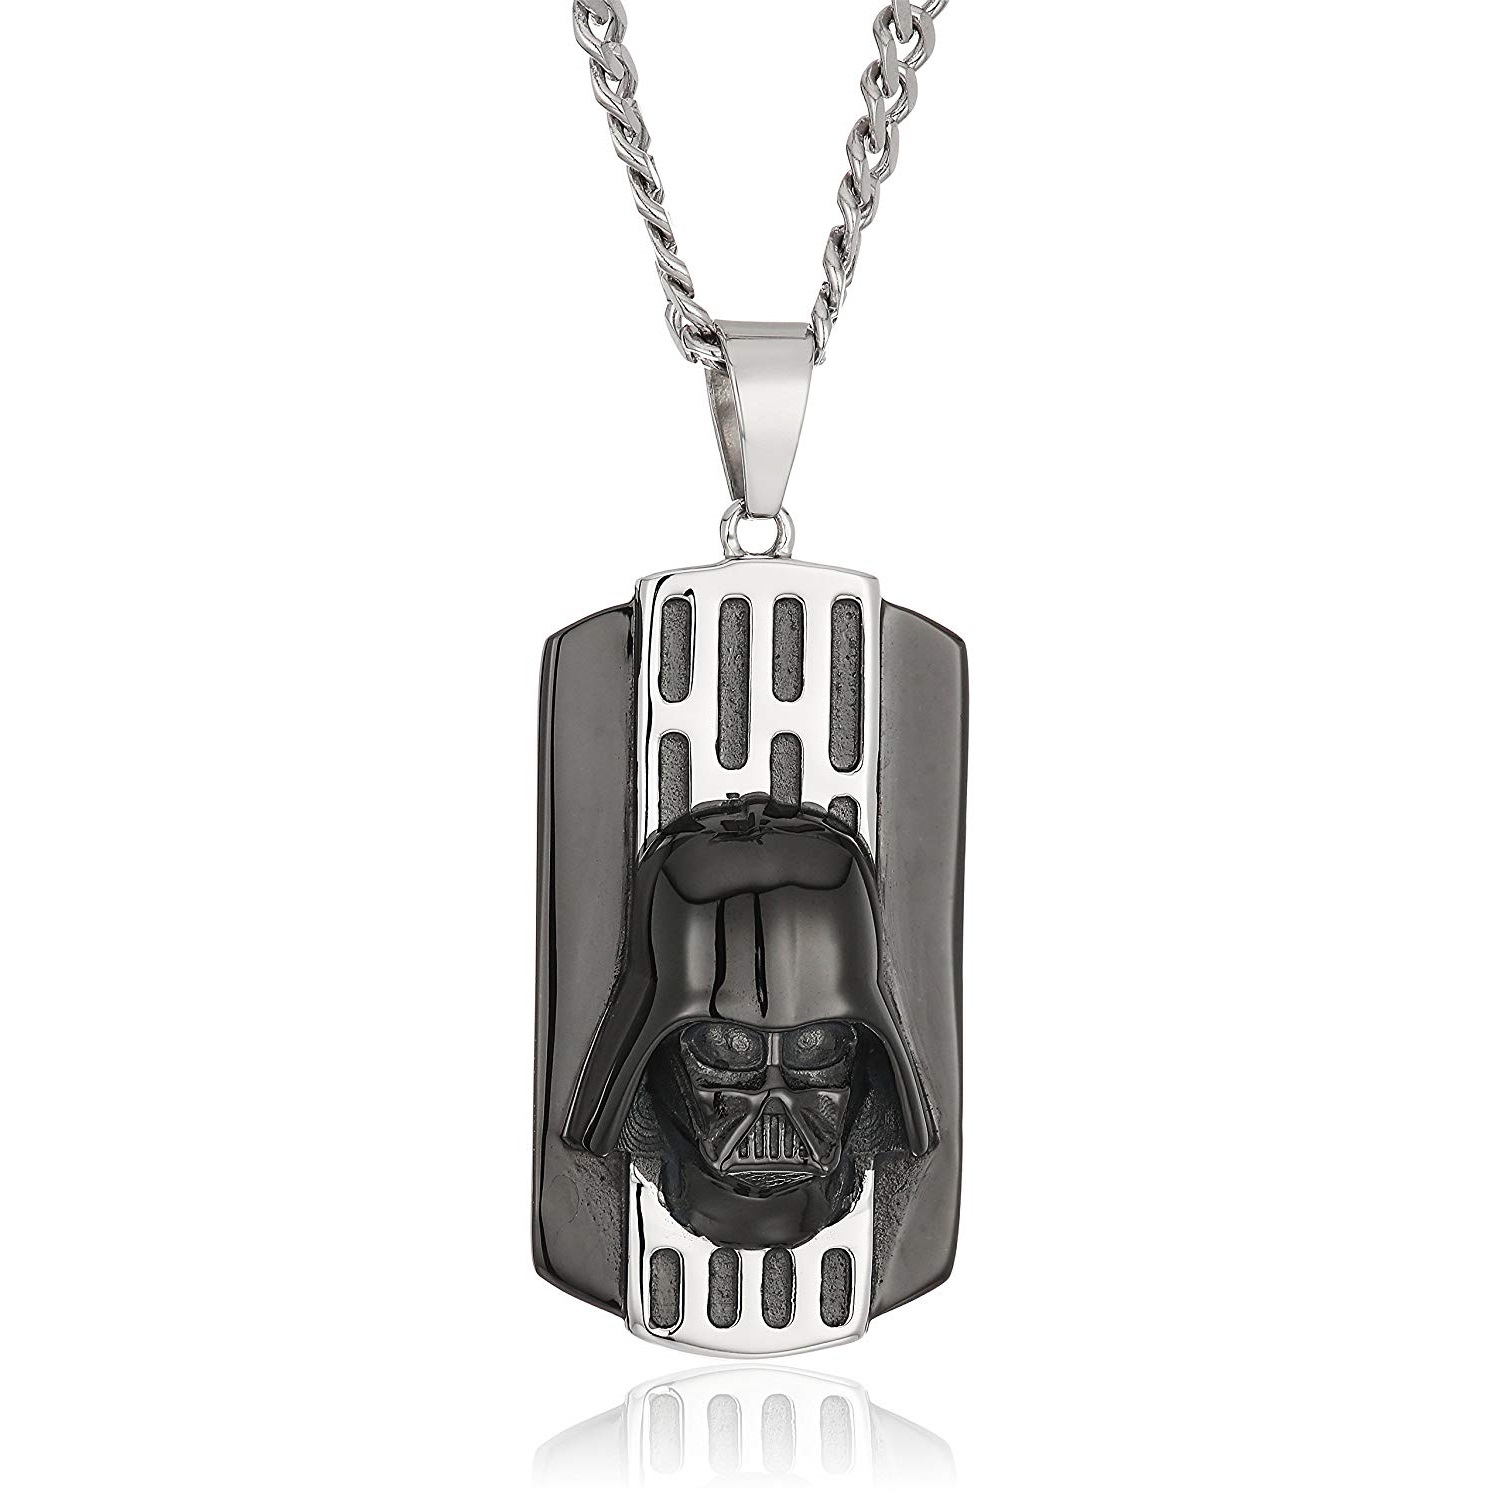 Body Vibe x Star Wars Darth Vader Back Plated Necklace on Amazon